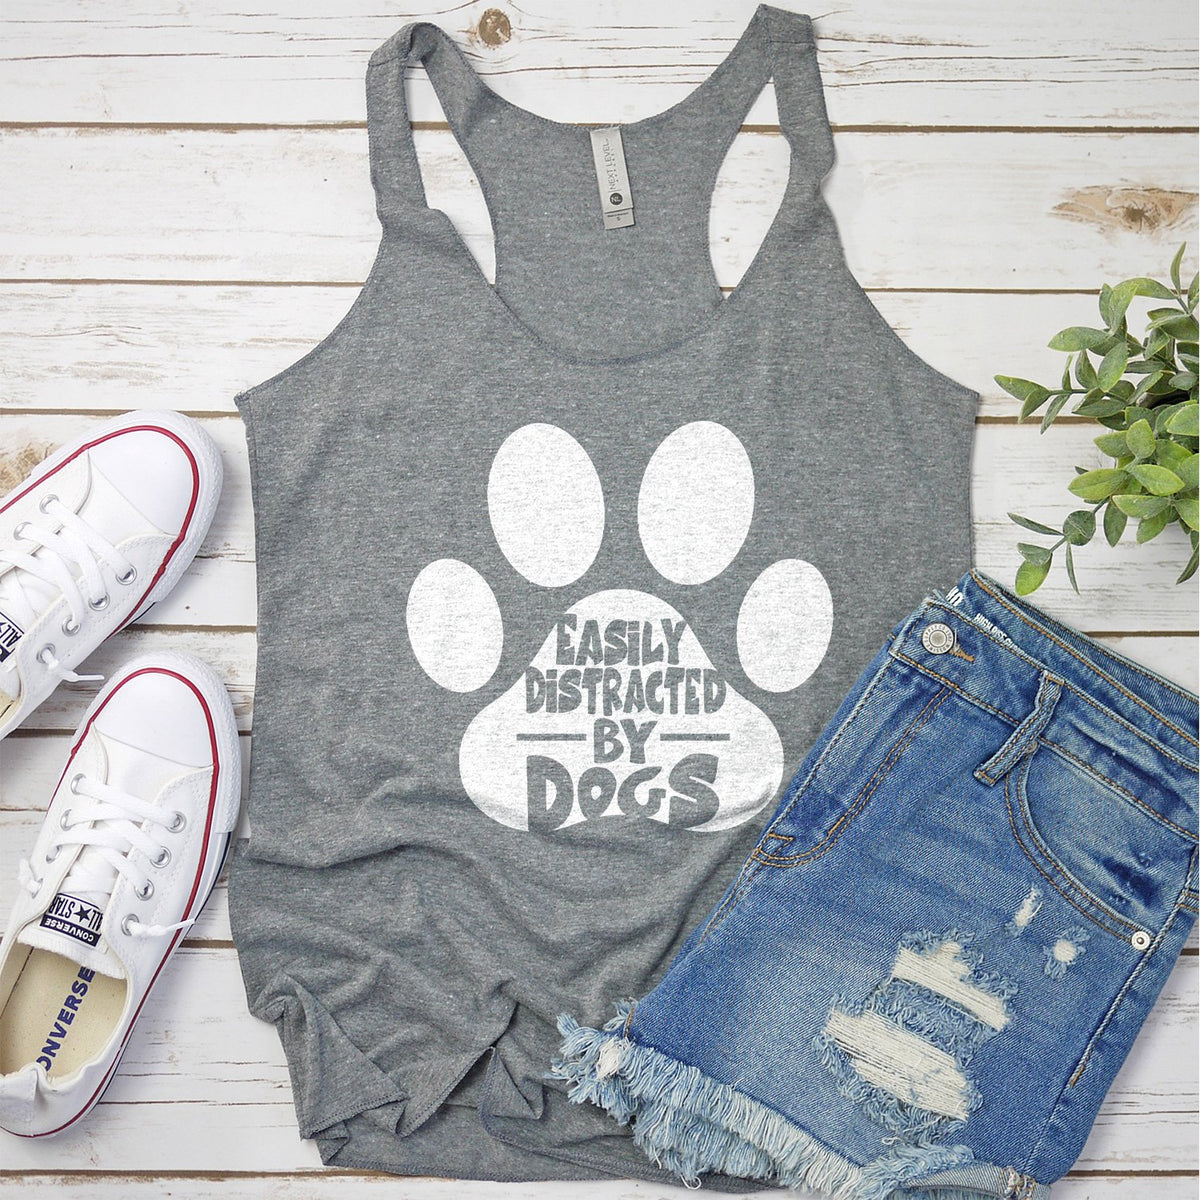 Easily Distracted By Dogs - Tank Top Racerback